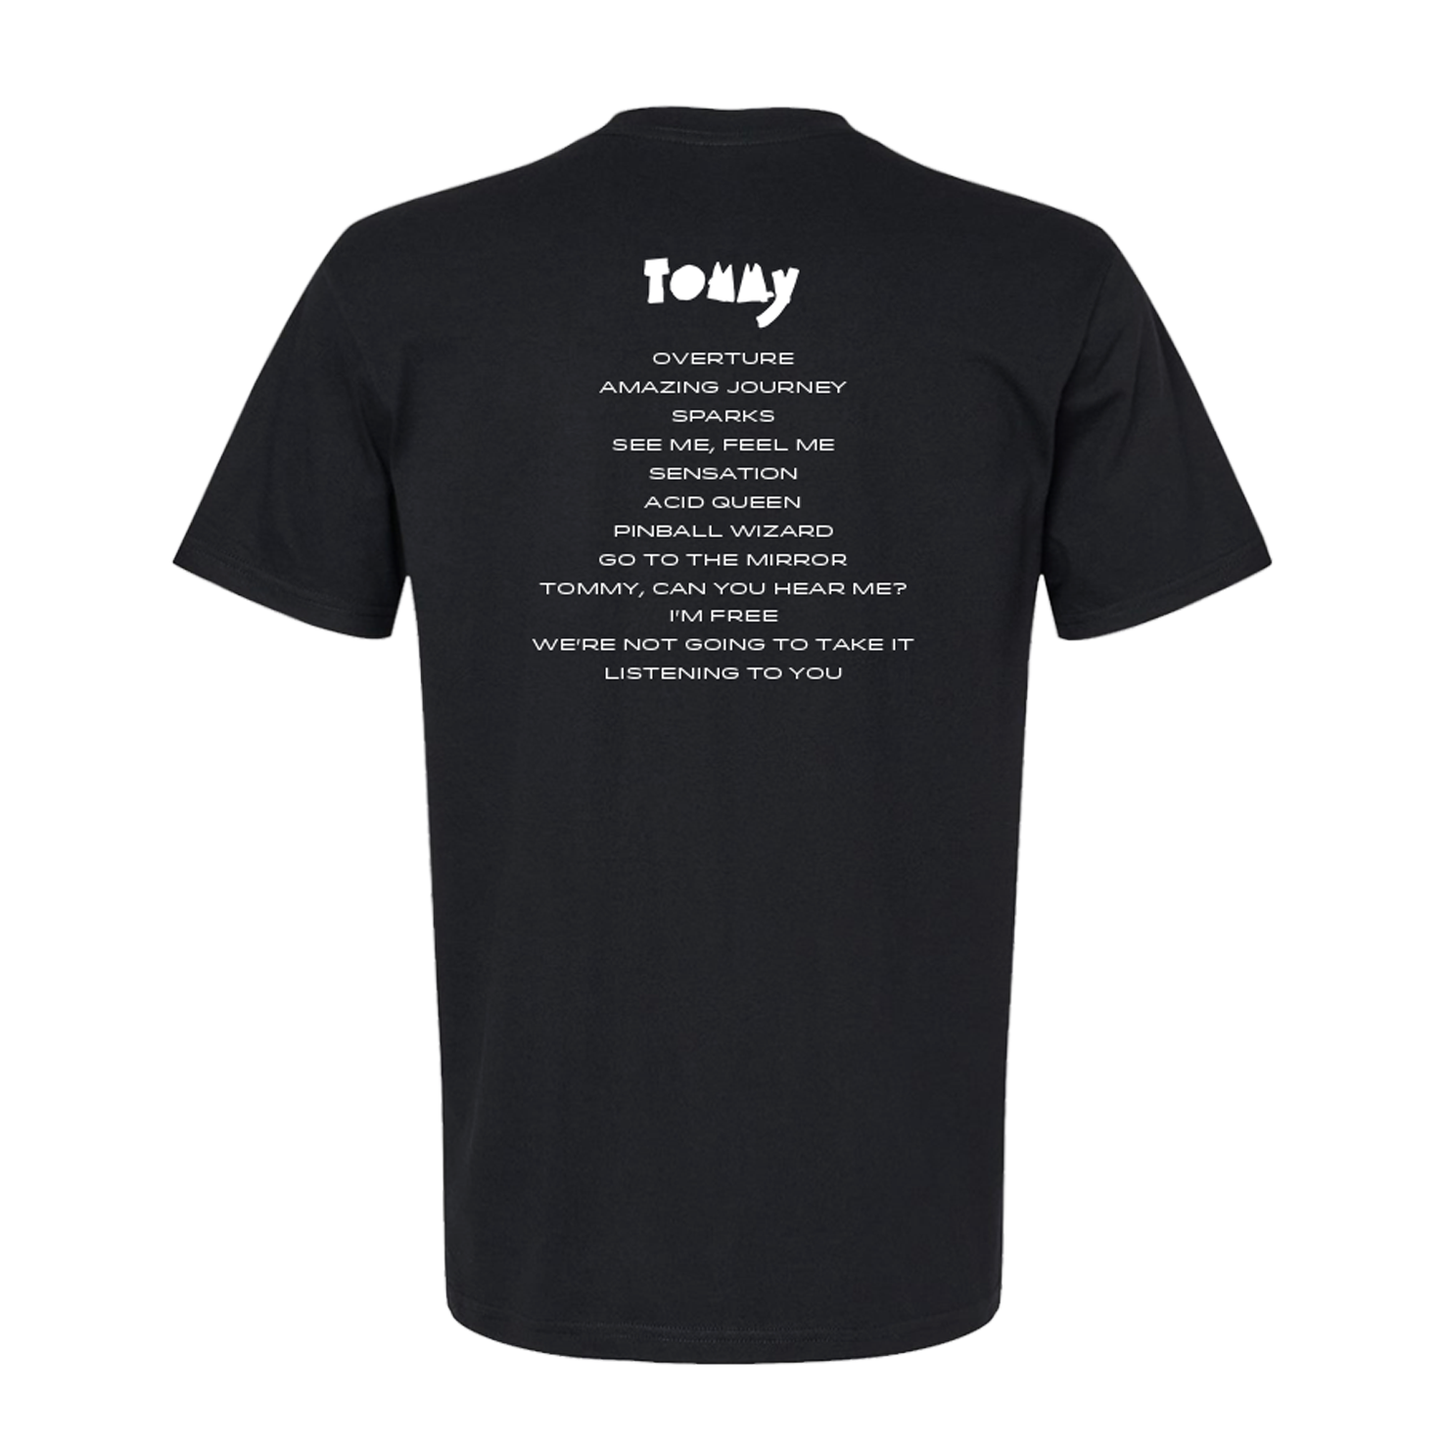 THE WHO'S TOMMY Concert Tee